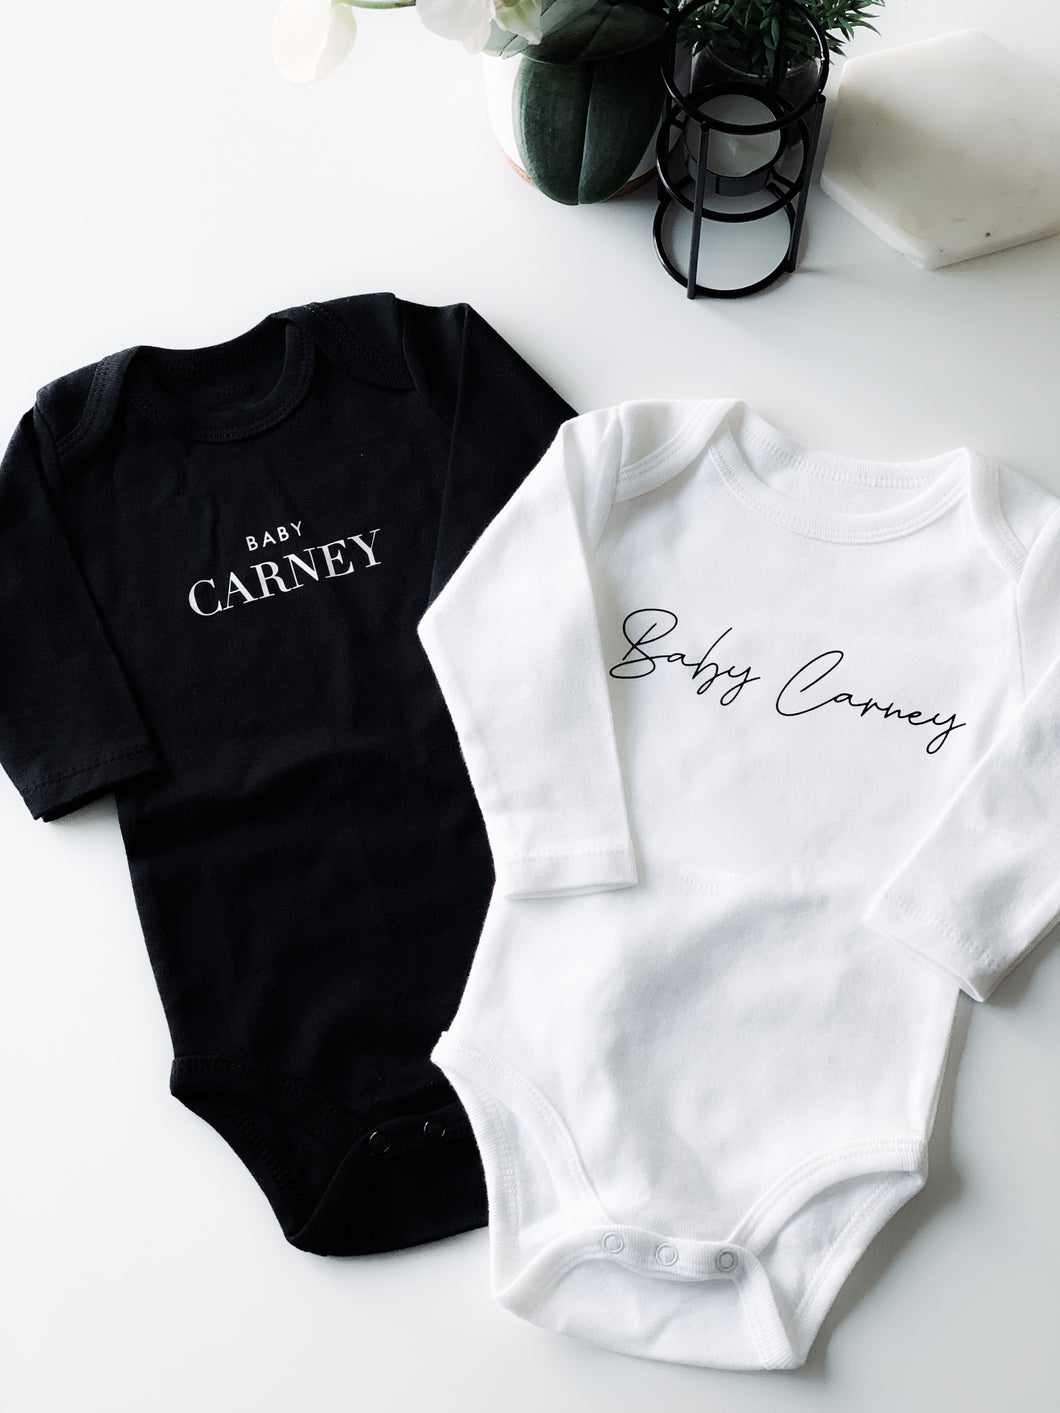 BABY ONESIE - Assorted Designs Available